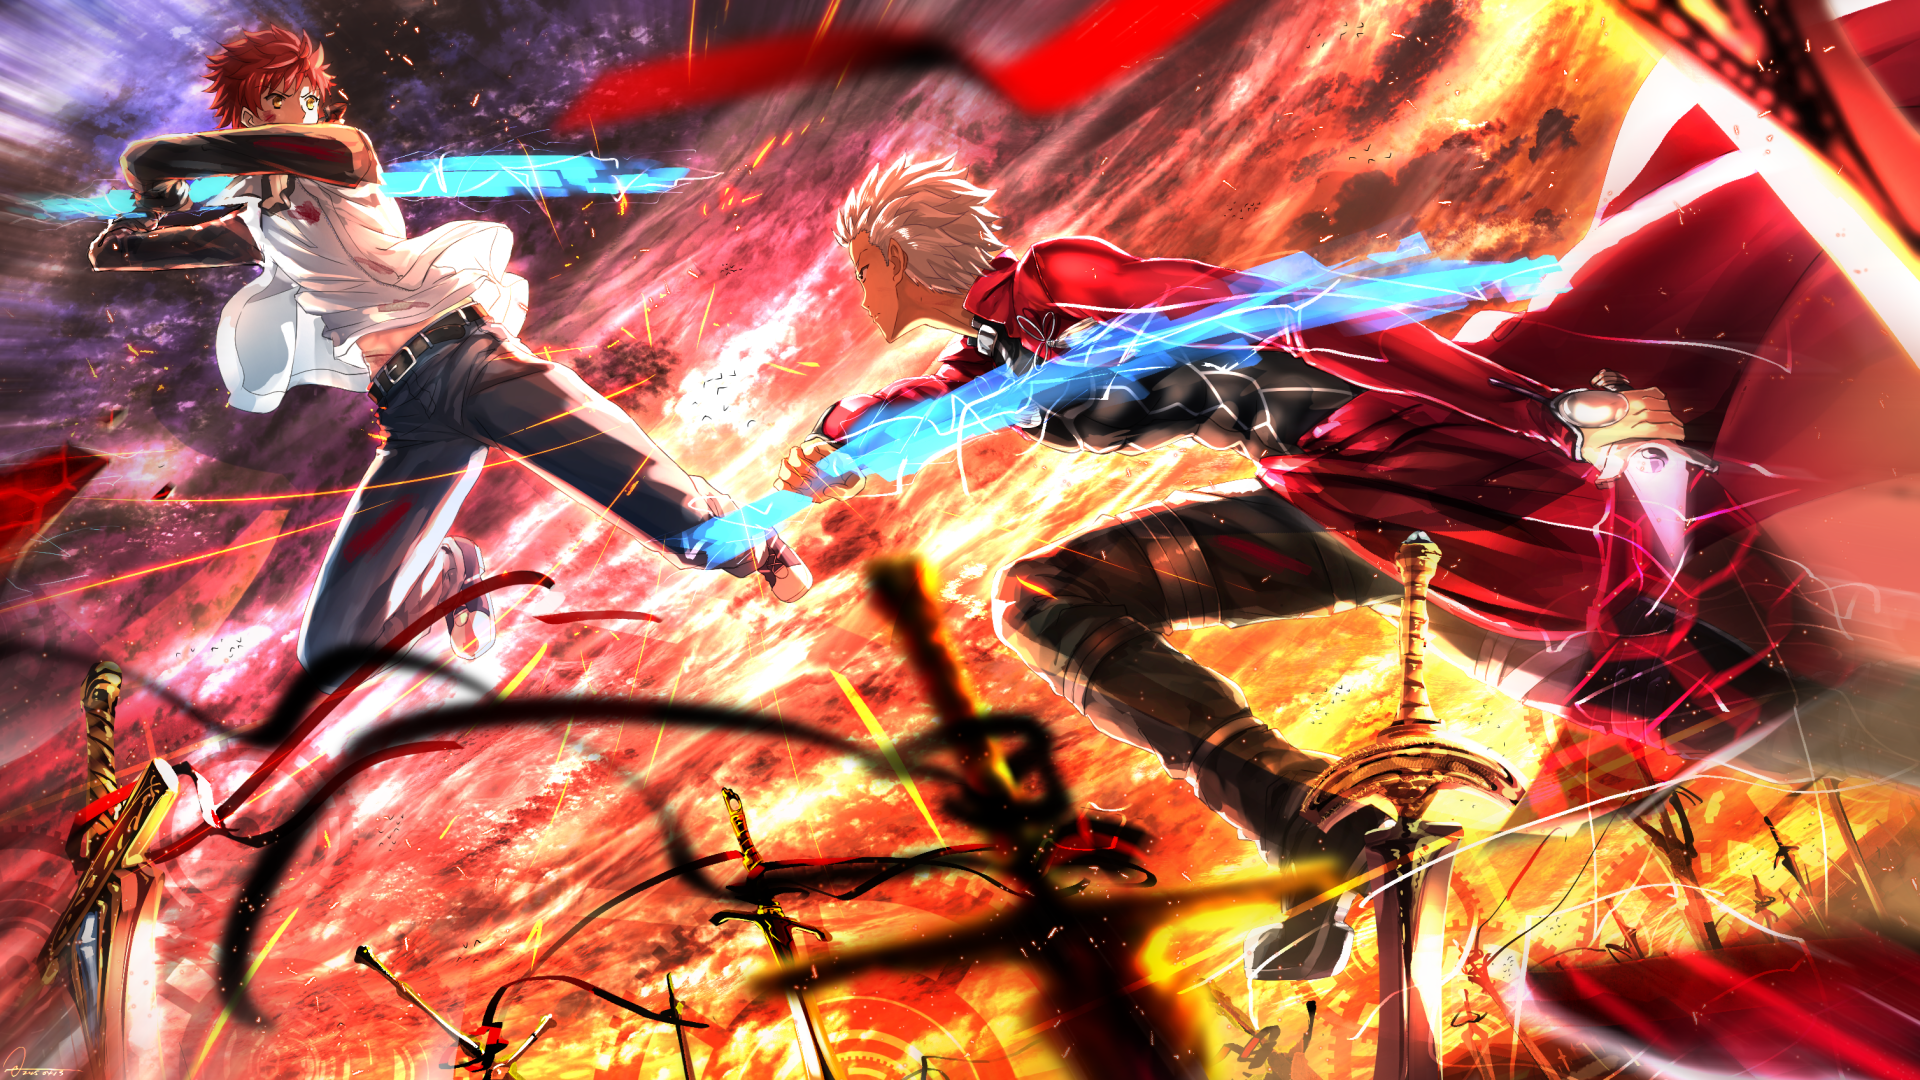 144 Archer Fate Stay Night Hd Wallpapers Background Images Wallpaper Abyss